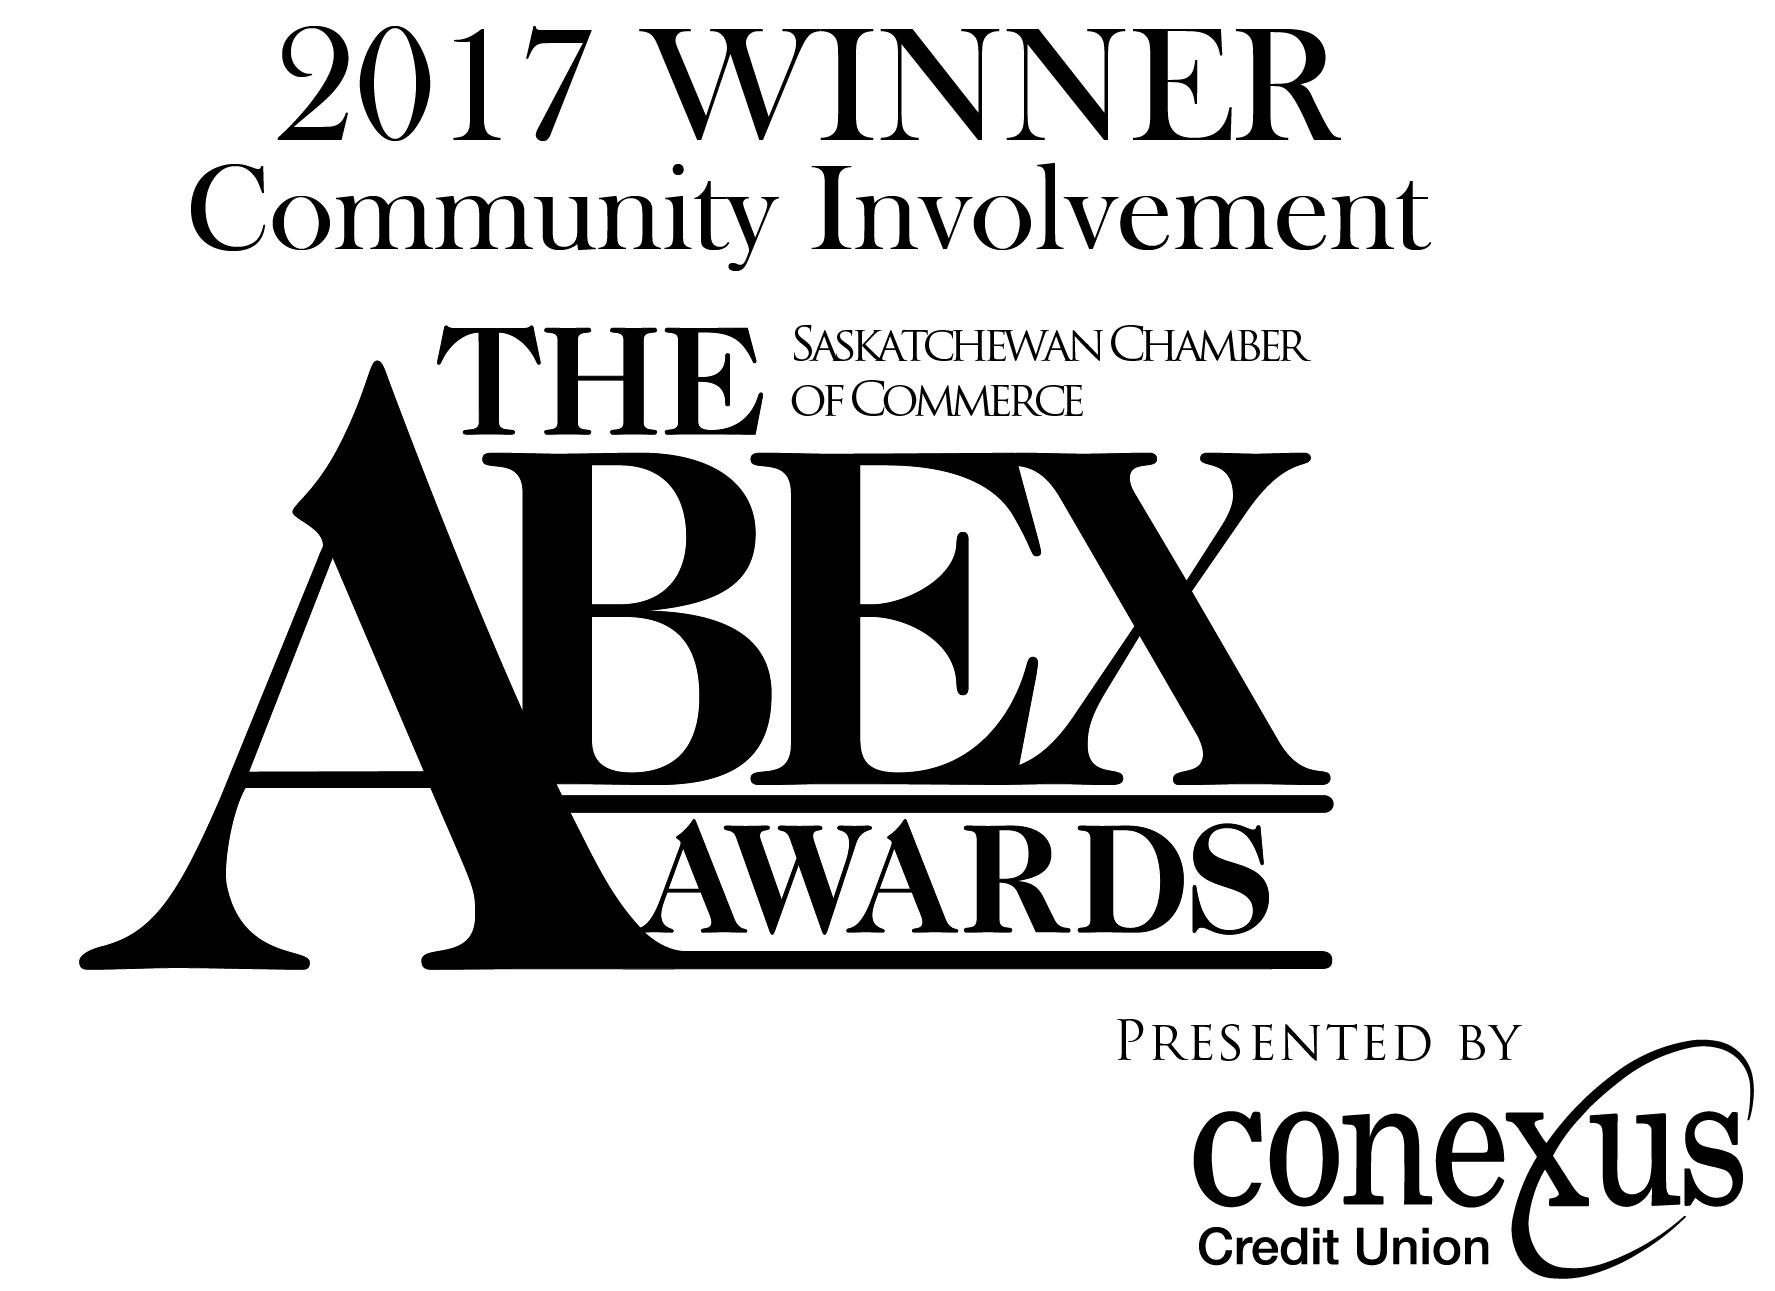 Trusted Announced As Winners Of 2017 ABEX Award For Community Involvement